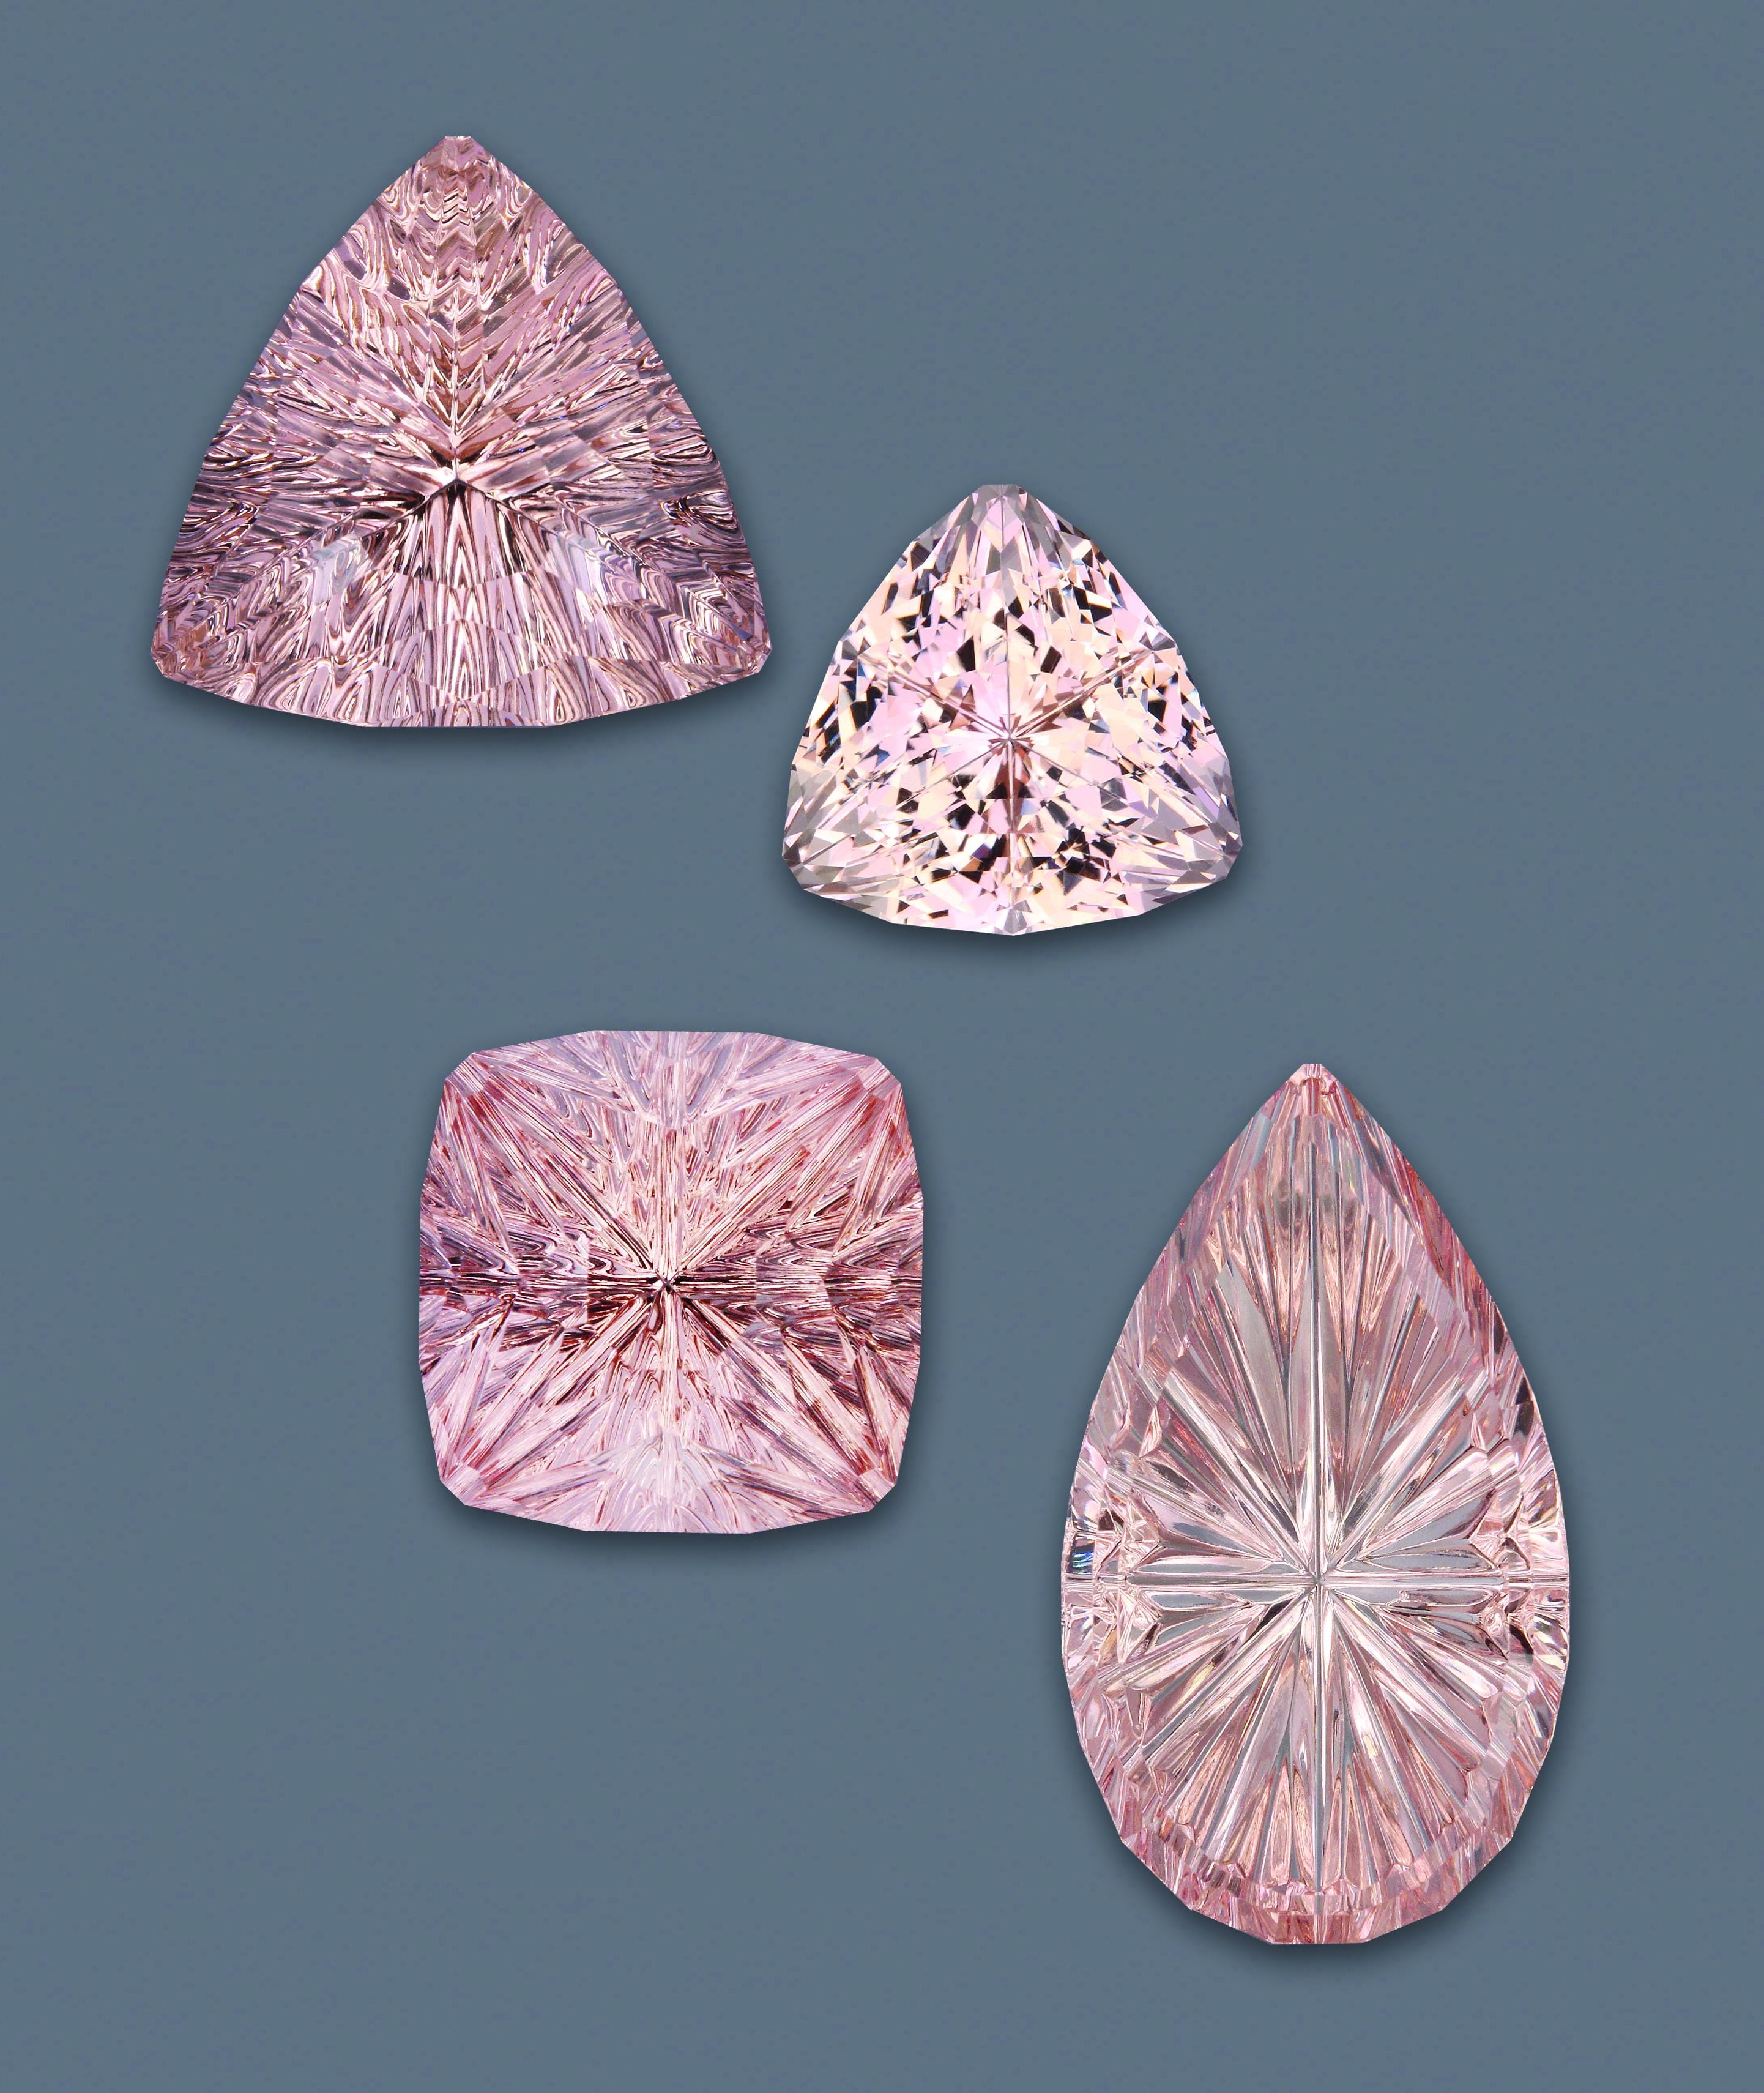 This suite of morganite (16.69–22.22 ct) was cut from Brazilian rough